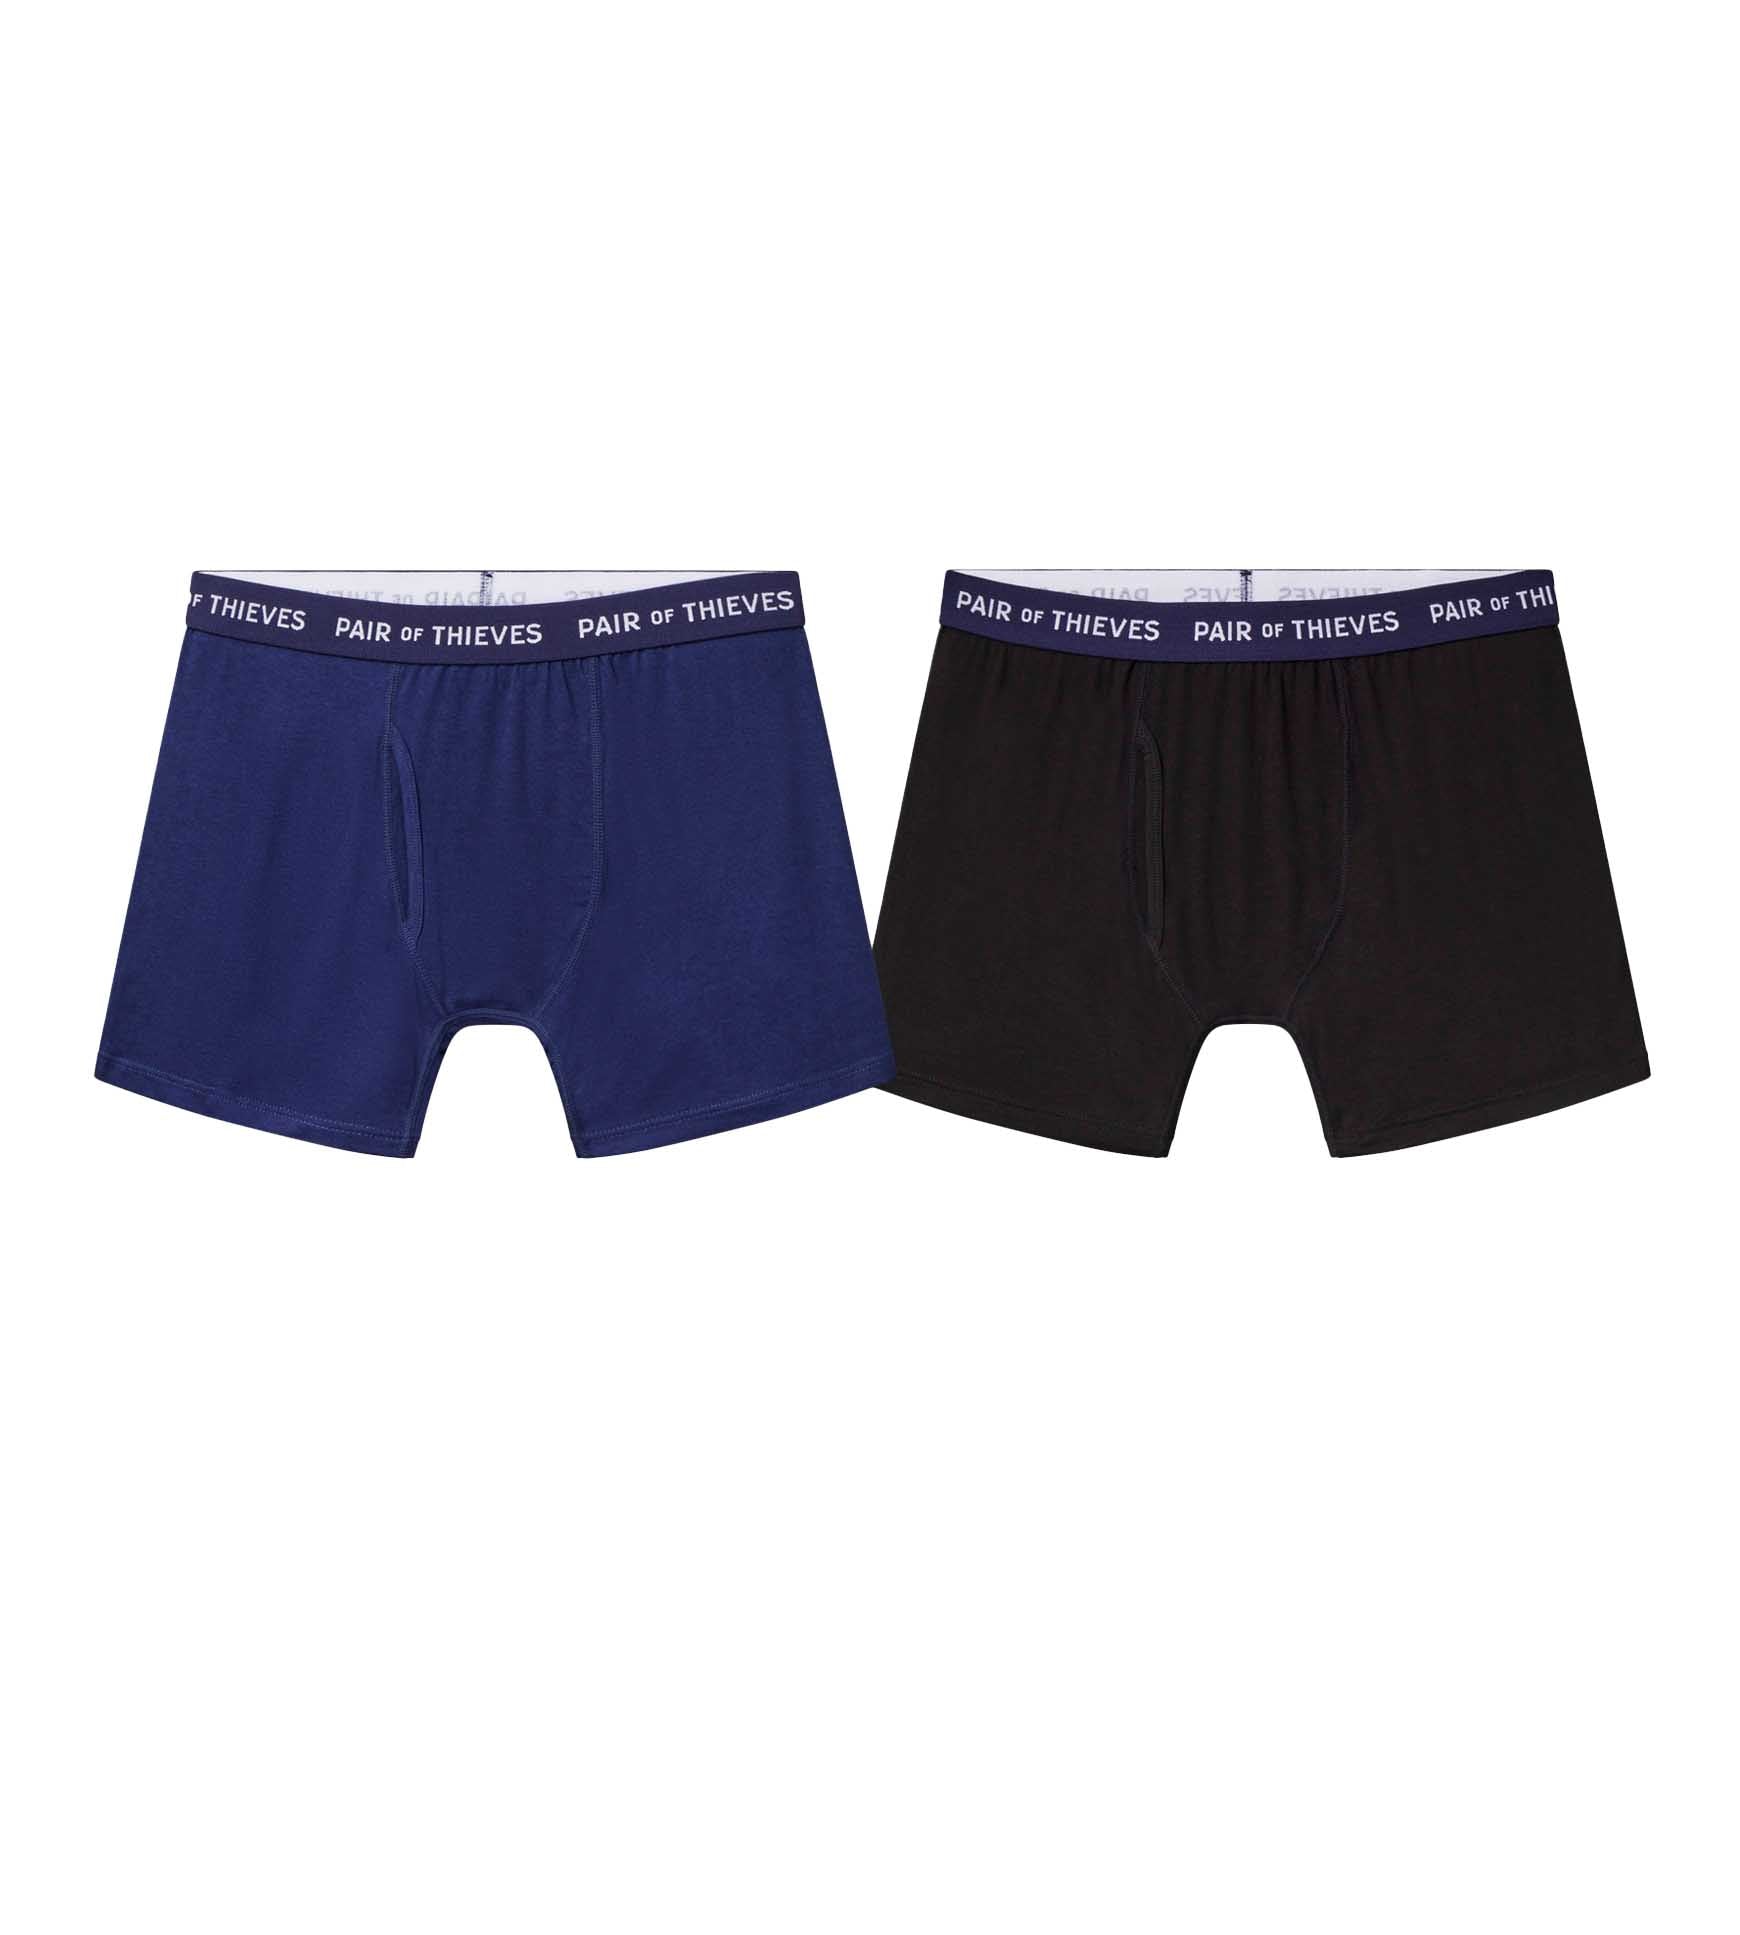  Pair Of Thieves Cotton Boxer Briefs For Men Pack